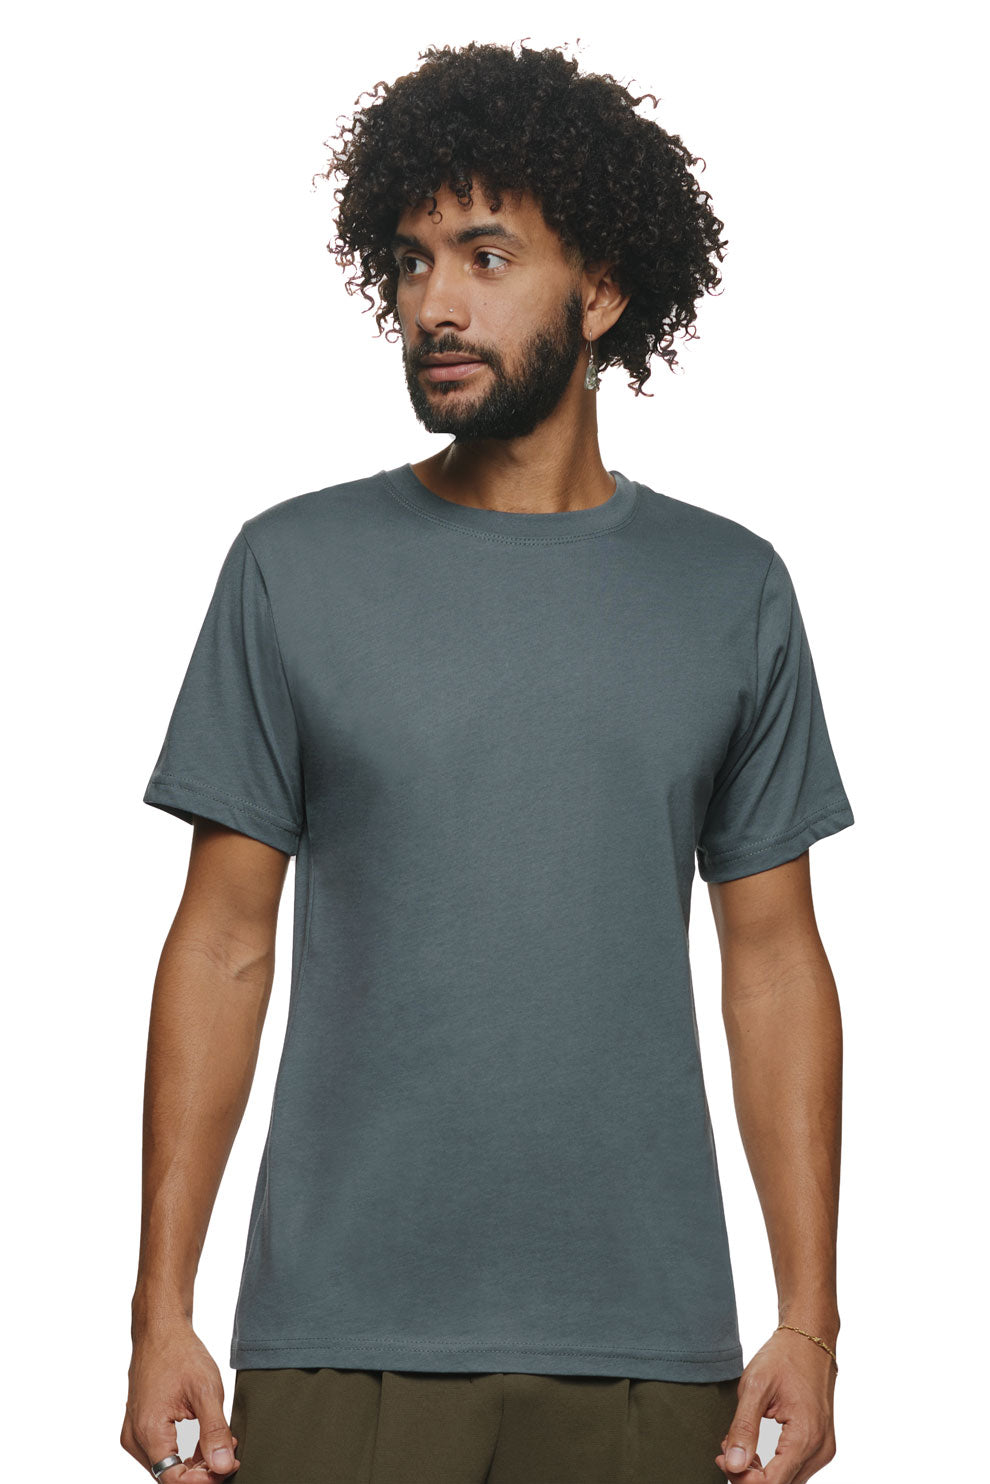 Trendy and Organic blank washed tshirt for All Seasons 